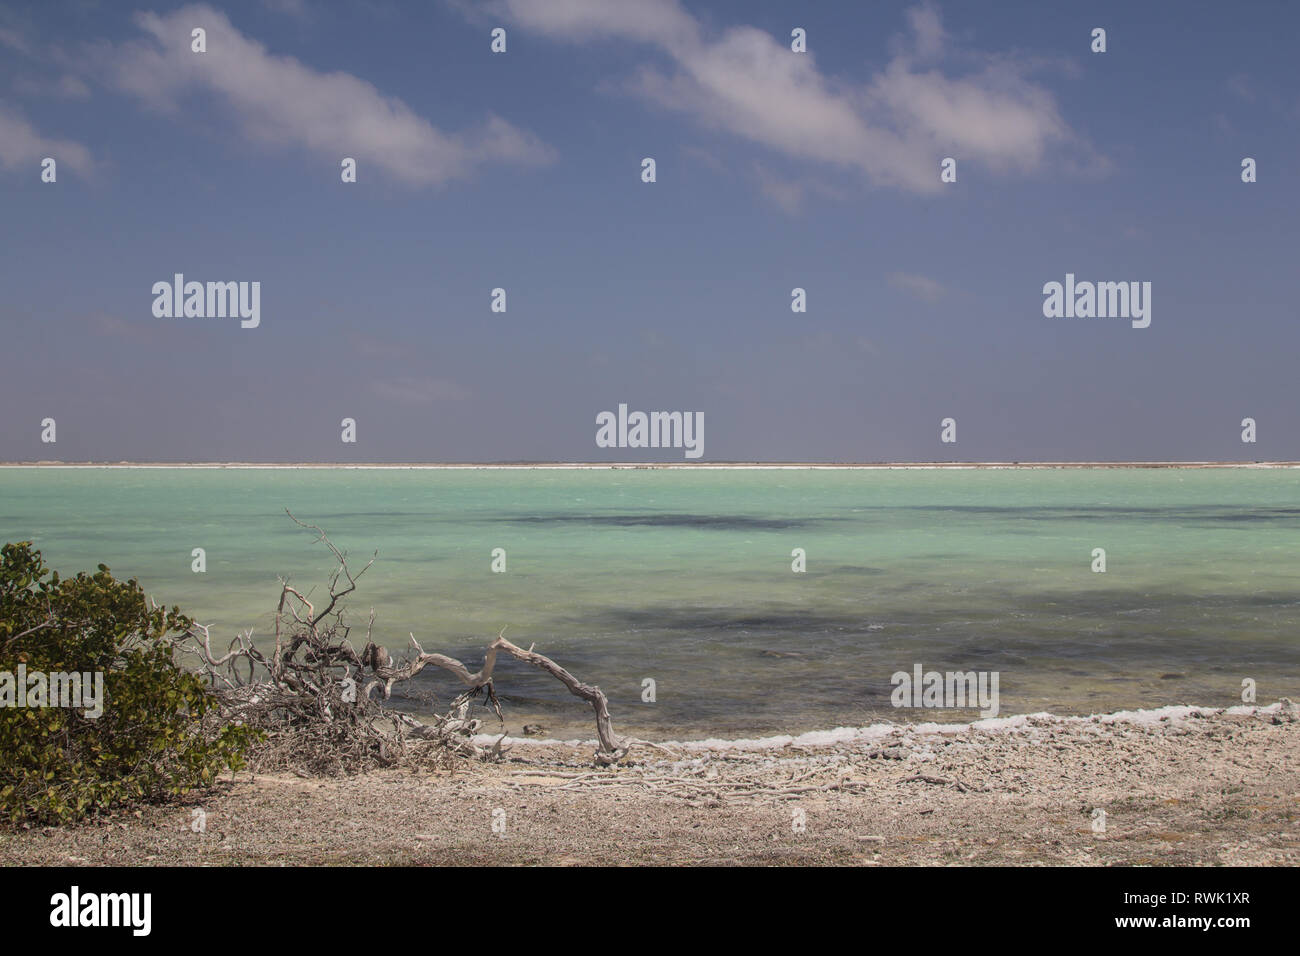 Dead, dried out wood and a bush in front of a Saline pan, called Blue Pan, near the conveyor belt of the Salt pier on Bonaire Stock Photo